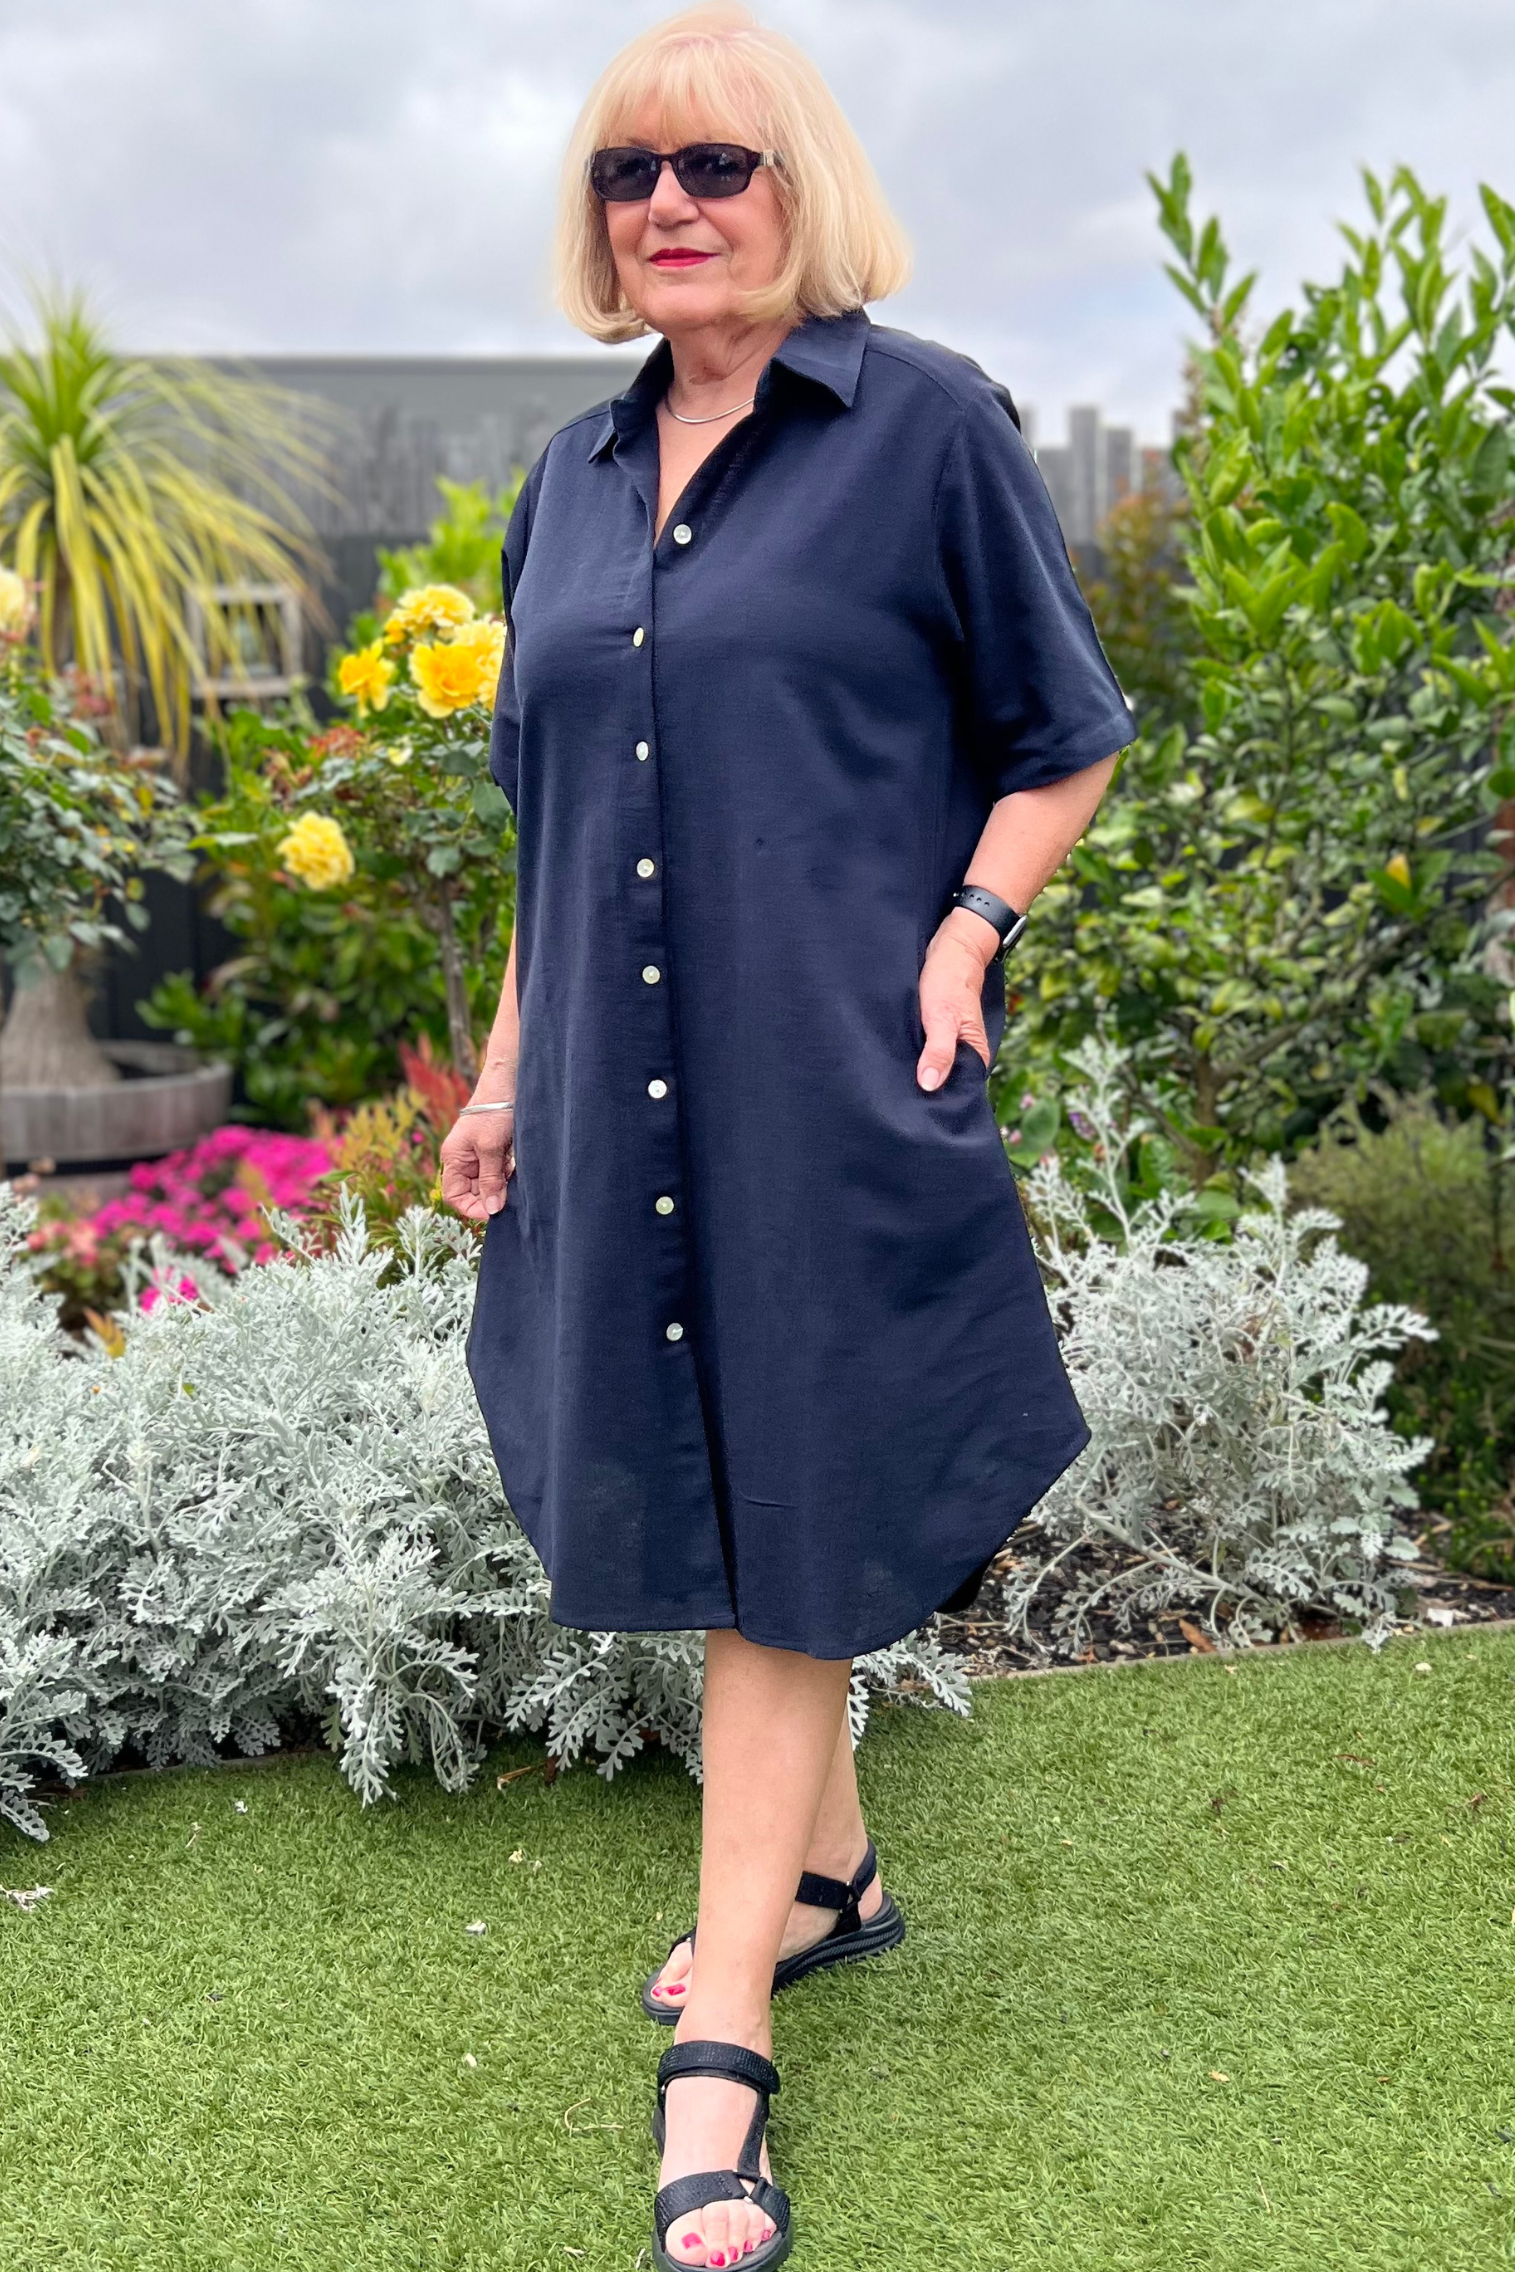 Kita Ku modelling the shirt dress pronto in solid black cotton and has shell buttons throughout, set in a sunny garden.